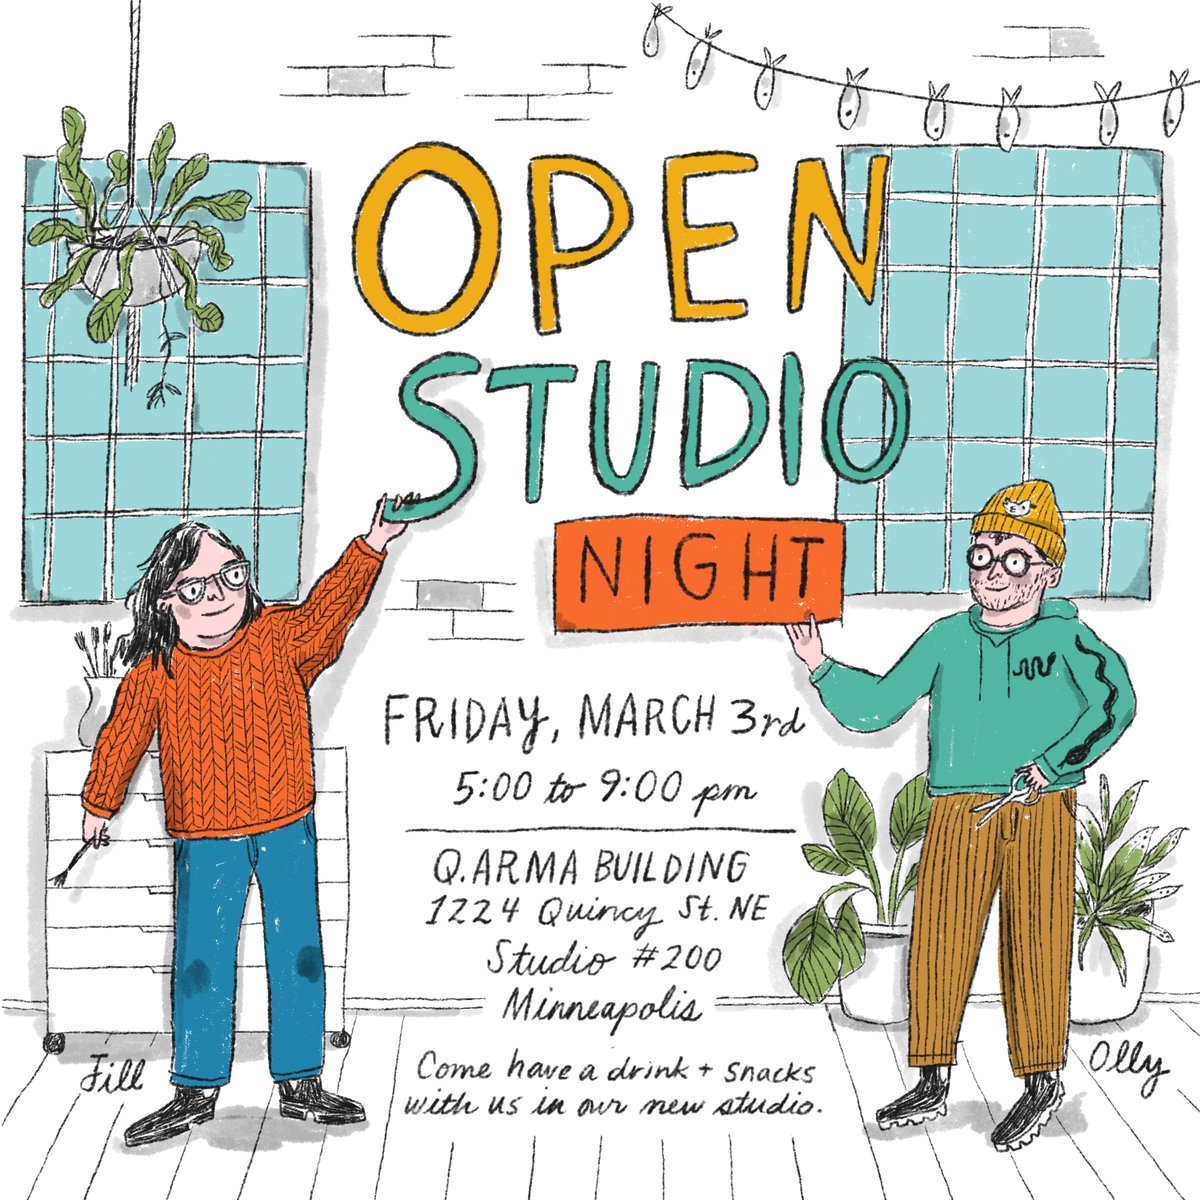 Hey locals! Come view us and our new studio IRL (in real life)
(artwork by our studio mate Jill Kittock!)